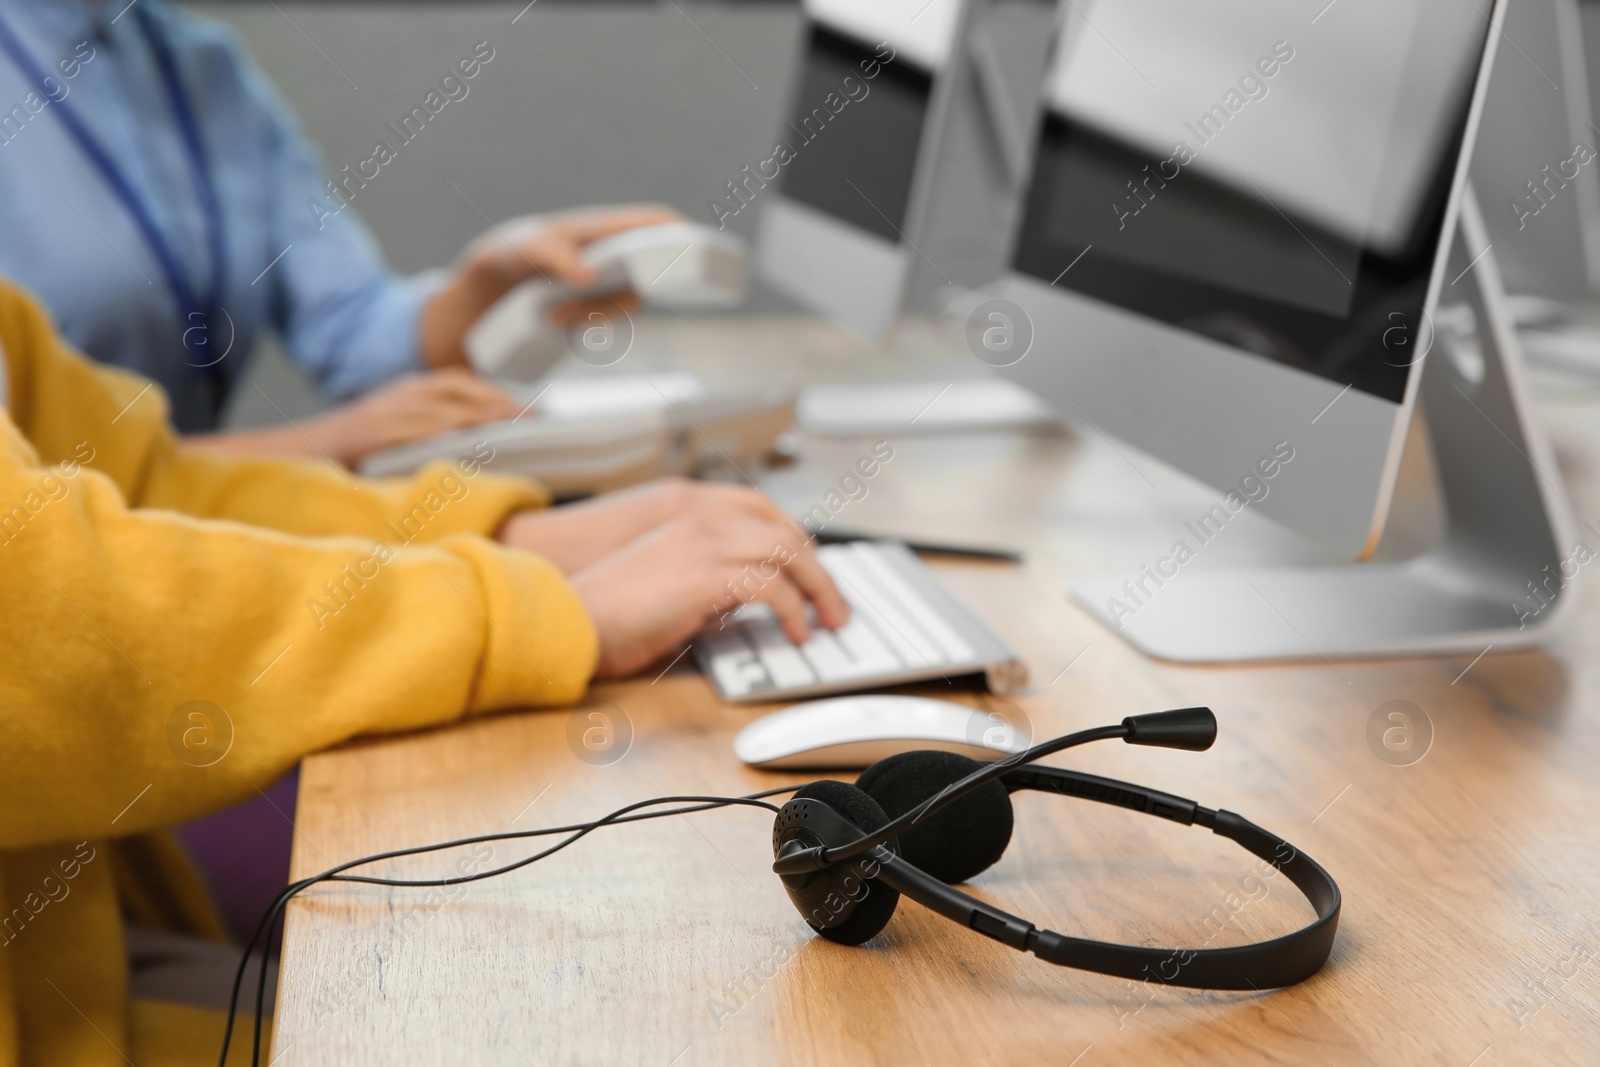 Photo of Technical support operators working at table in office, focus on headset